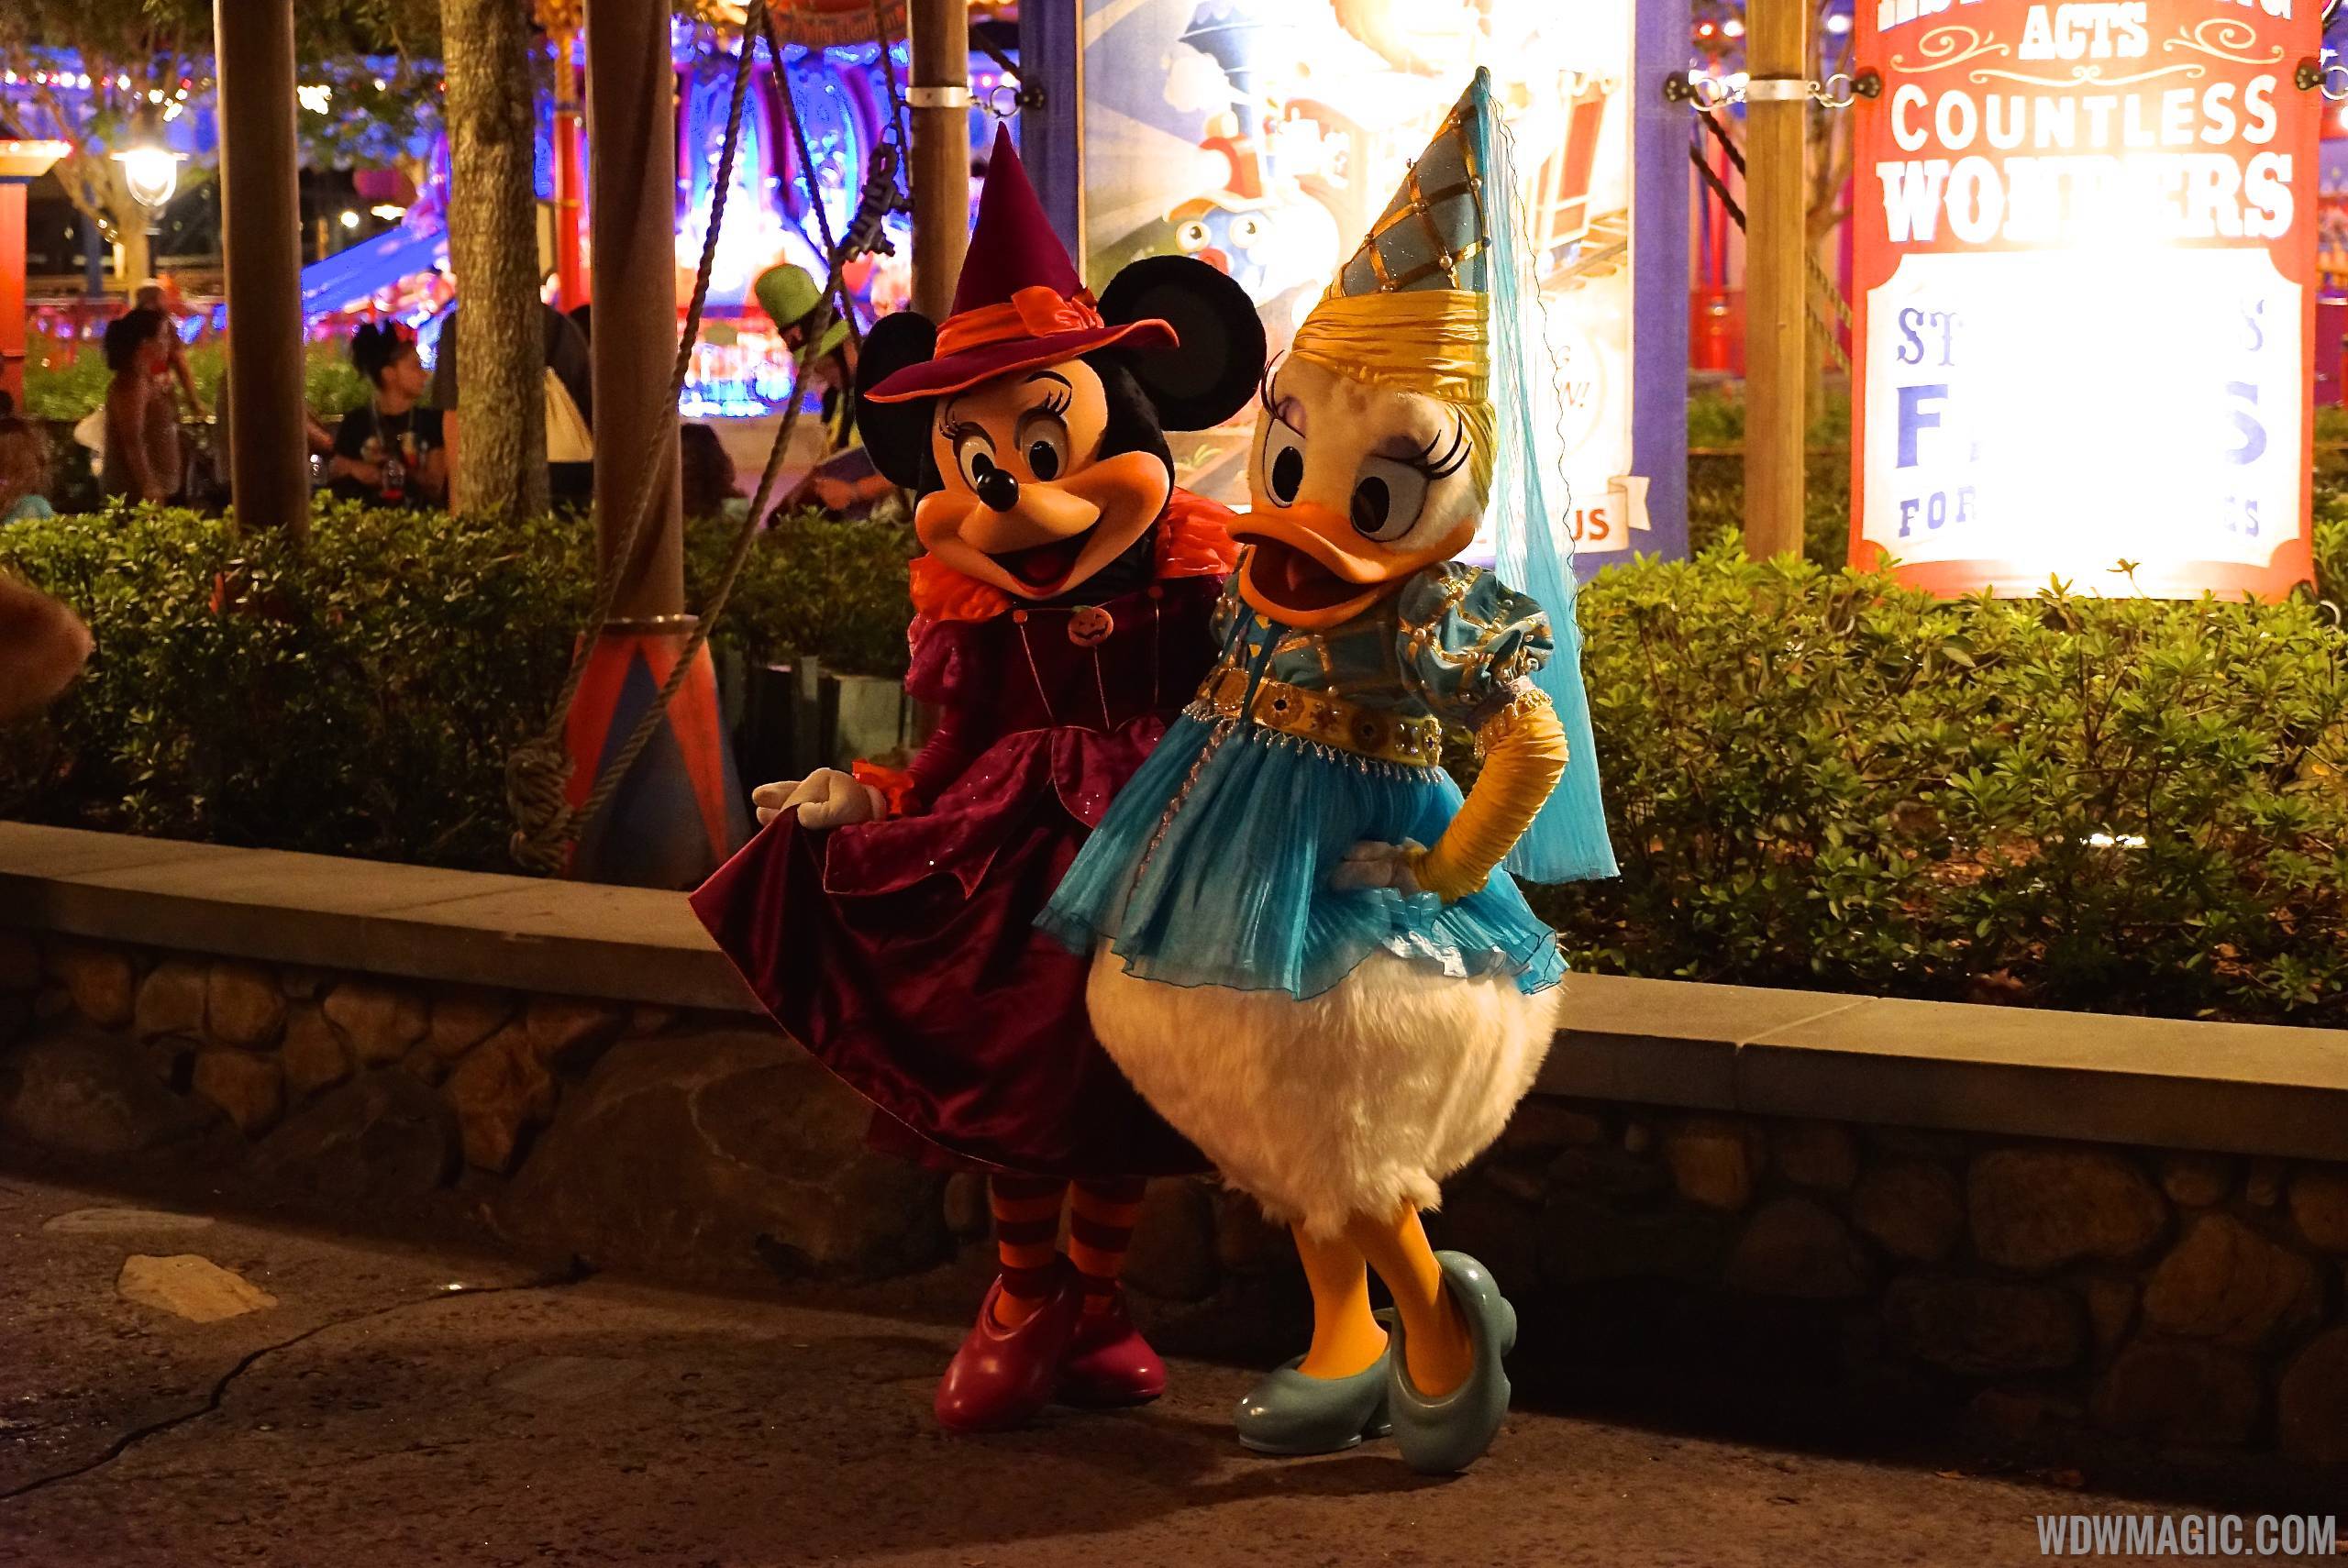 Minnie and Daisy meet and greet at Mickey's Not So Scary Halloween Party